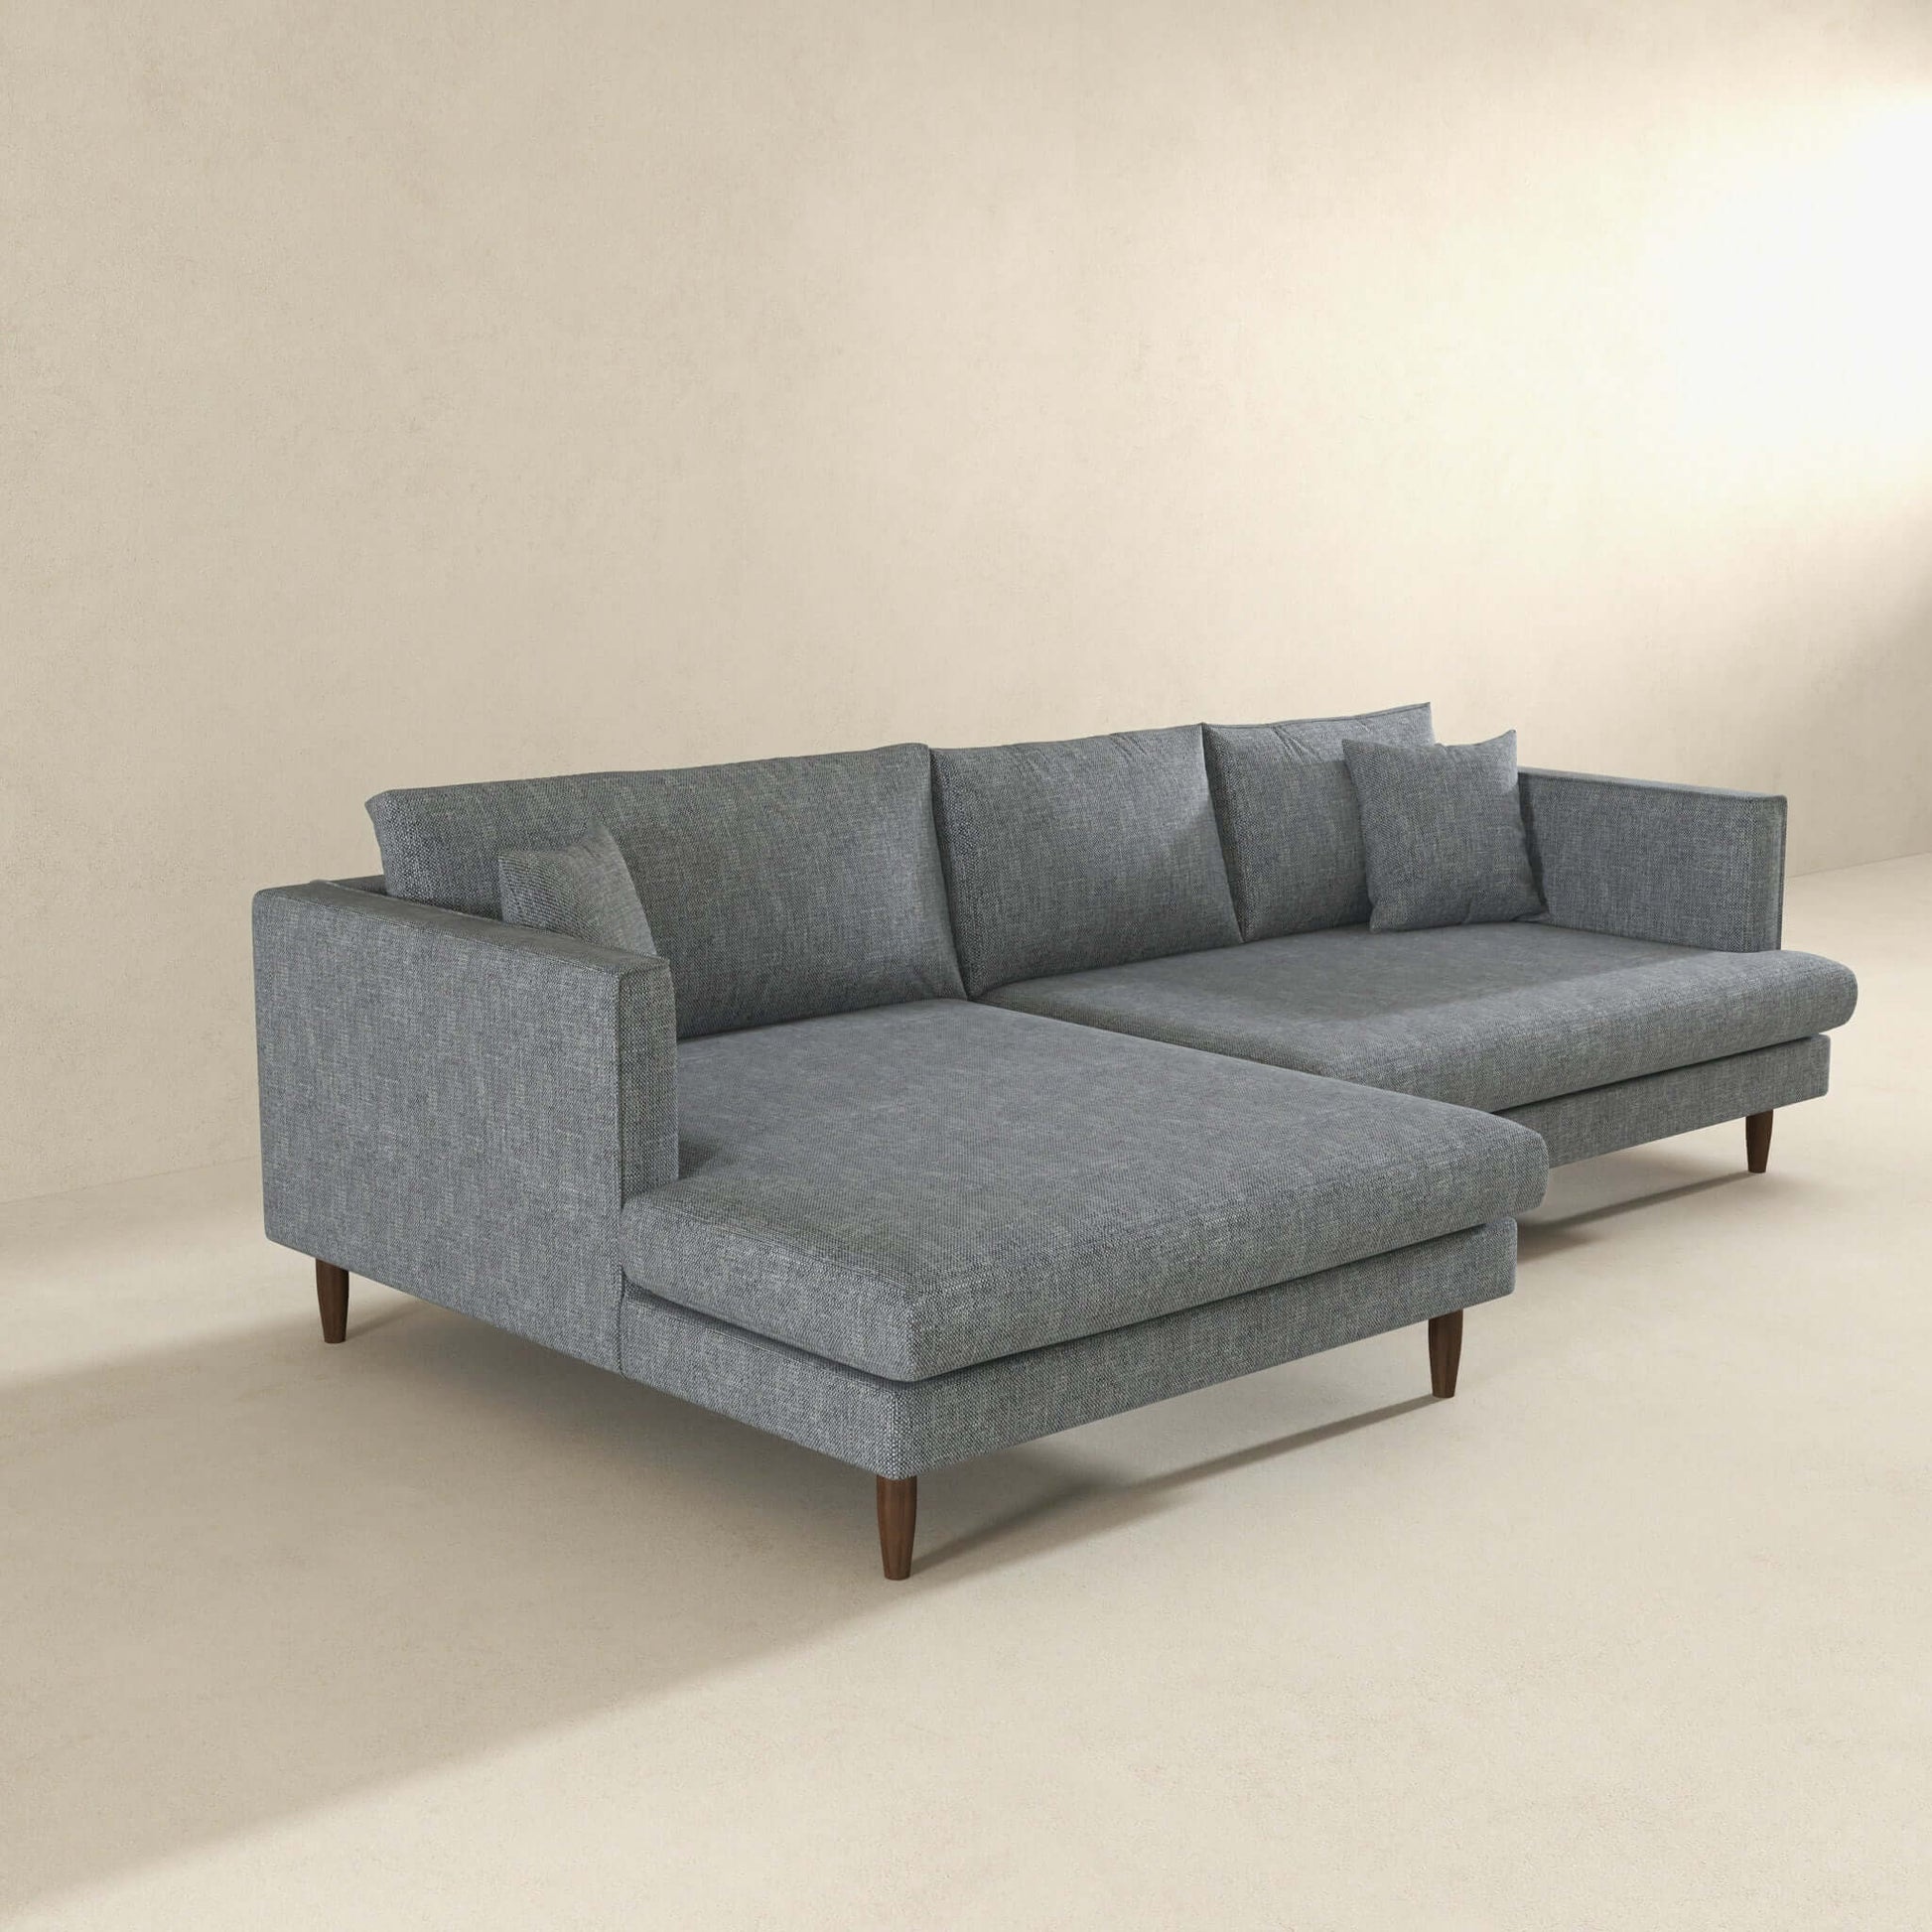 Ashcroft Furniture Co Sectional Sofas Blake L-Shaped Sectional Sofa